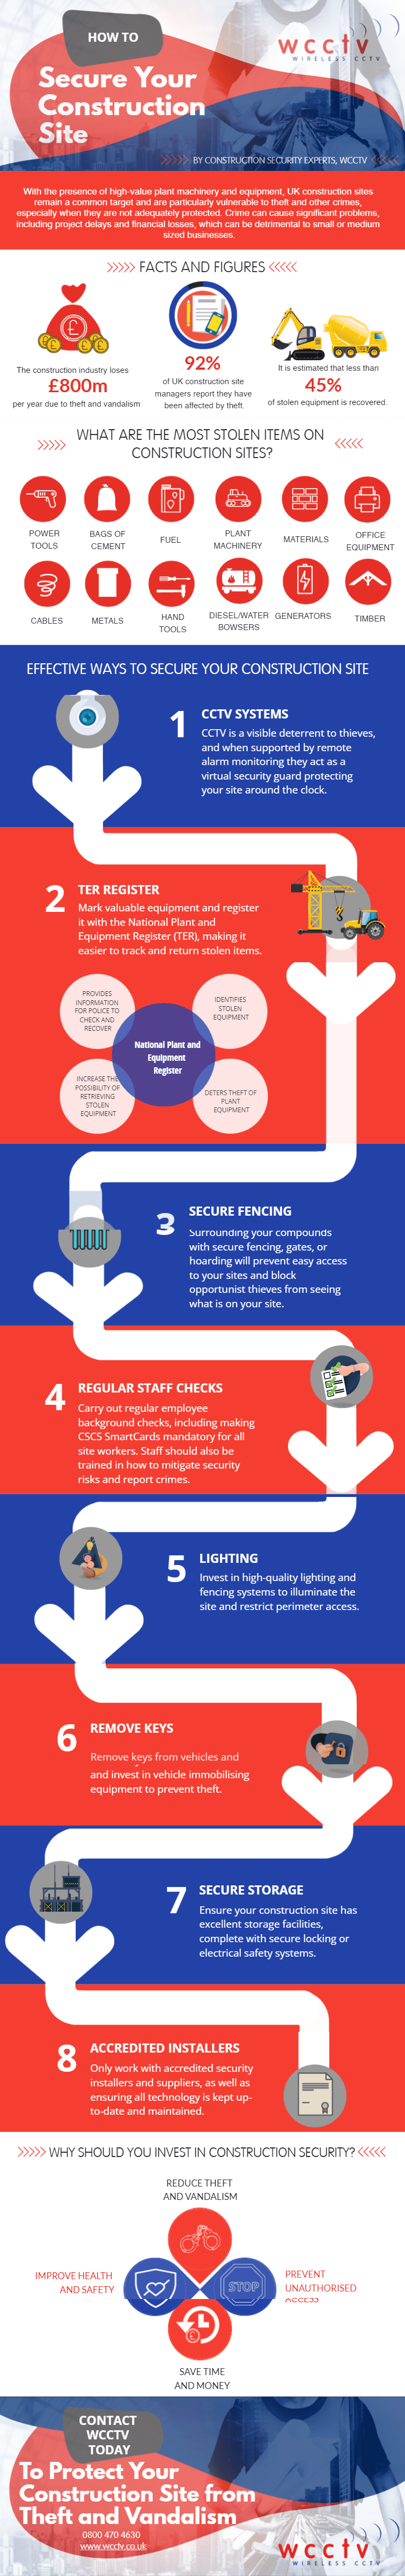 How to Secure Your Construction Site-Infographic